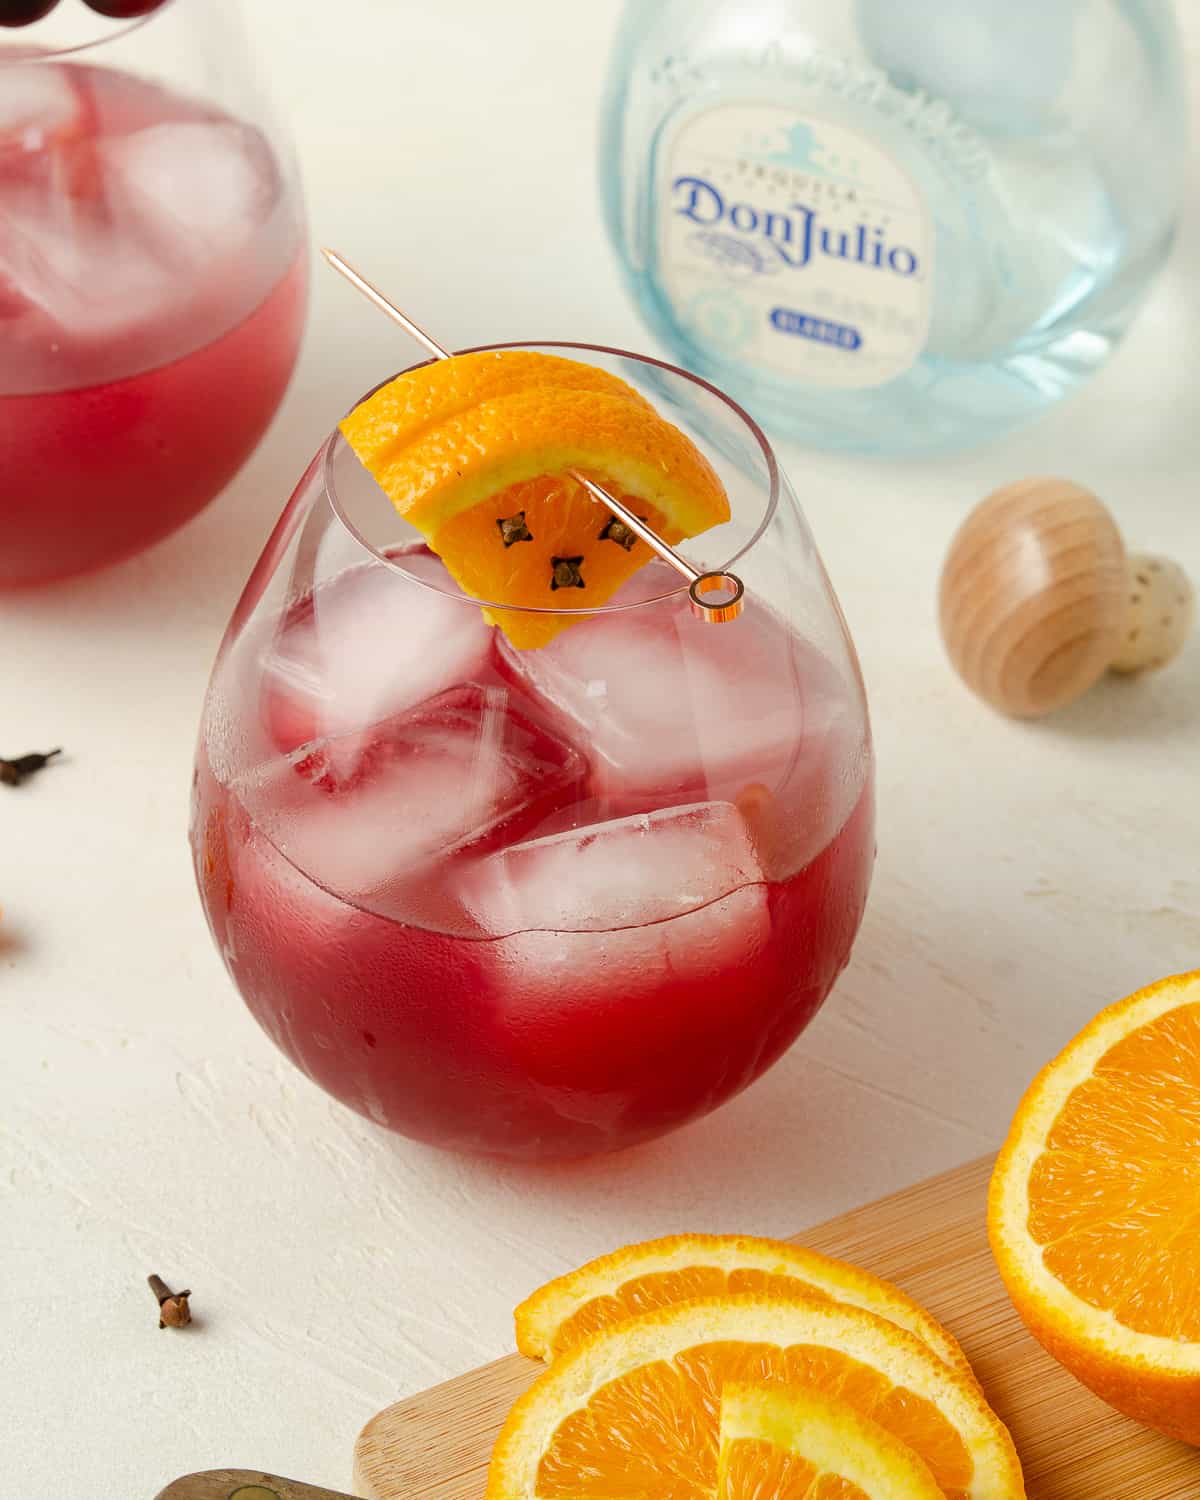 A cranberry margarita with a cutting board of oranges and a bottle of tequila in back.